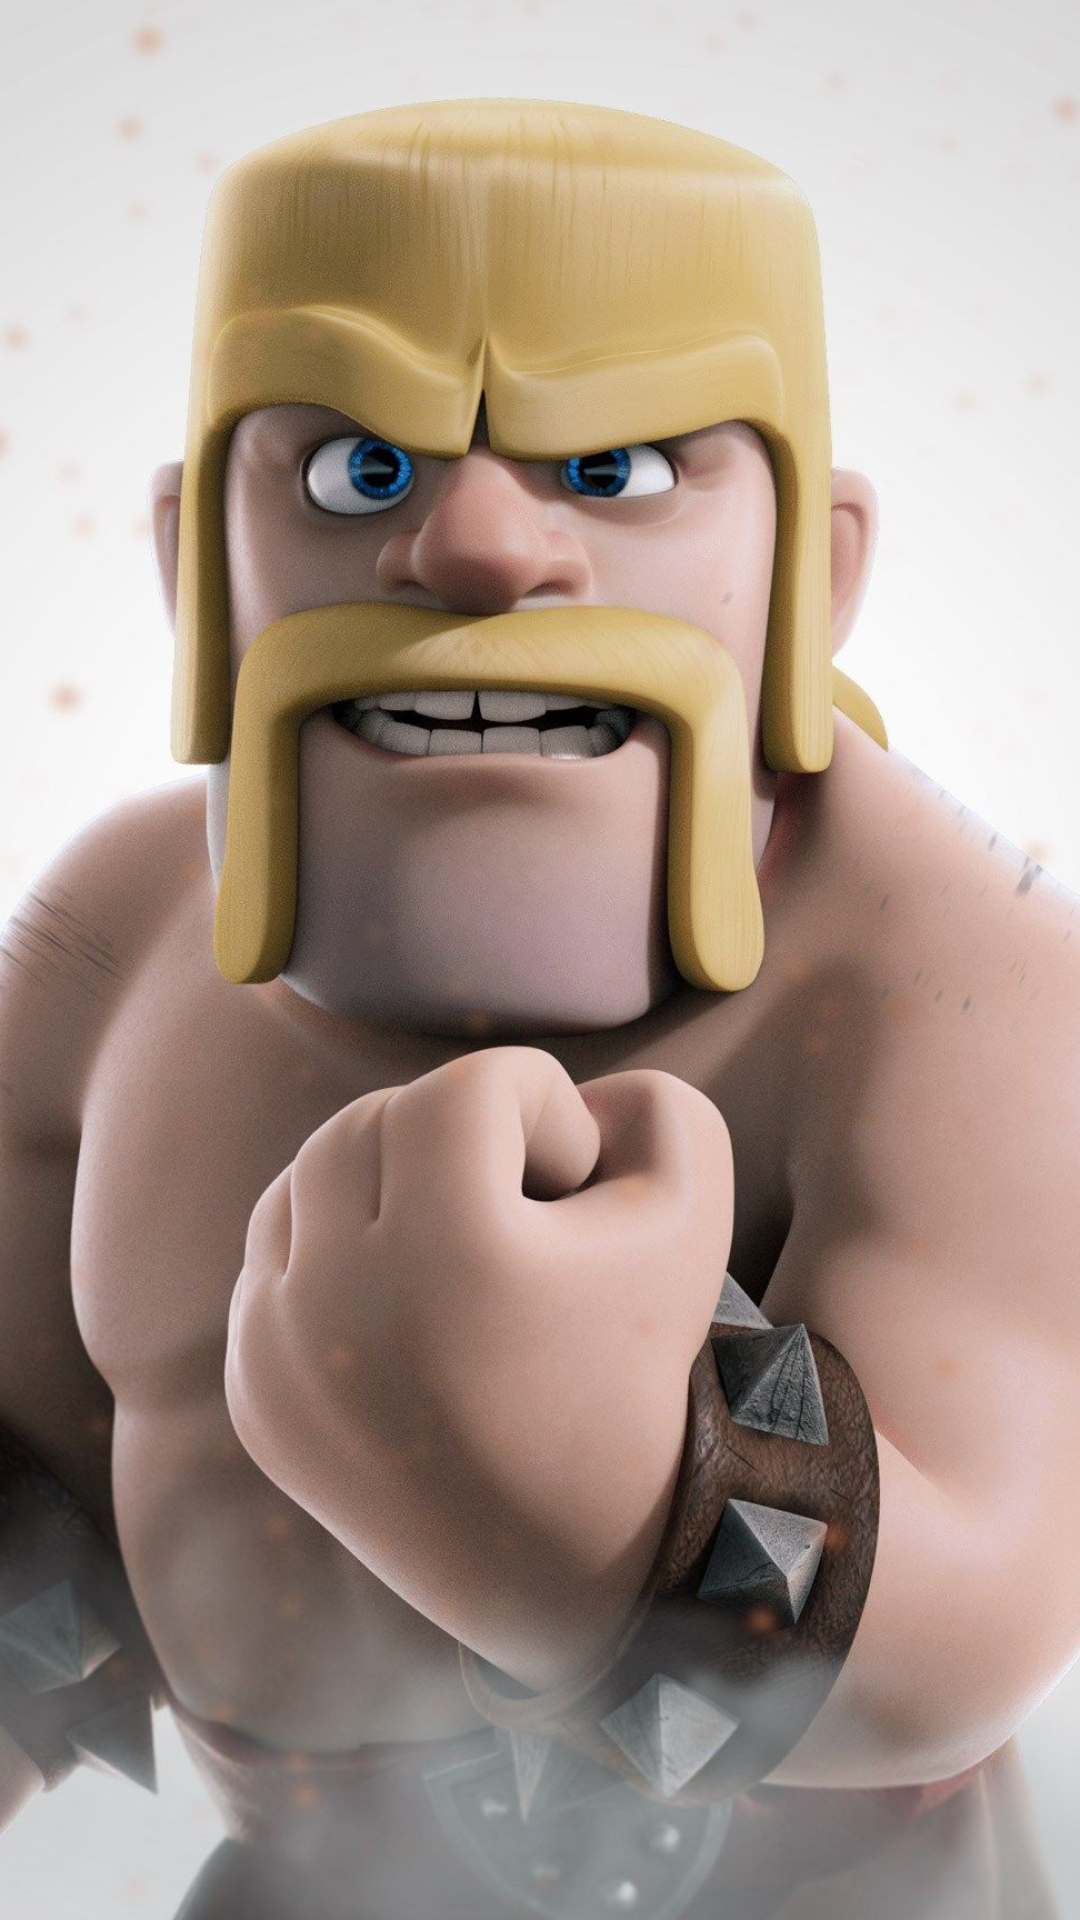 Clash of Clans: Barbarian, Clash Royale, CoC troops. 1080x1920 Full HD Wallpaper.